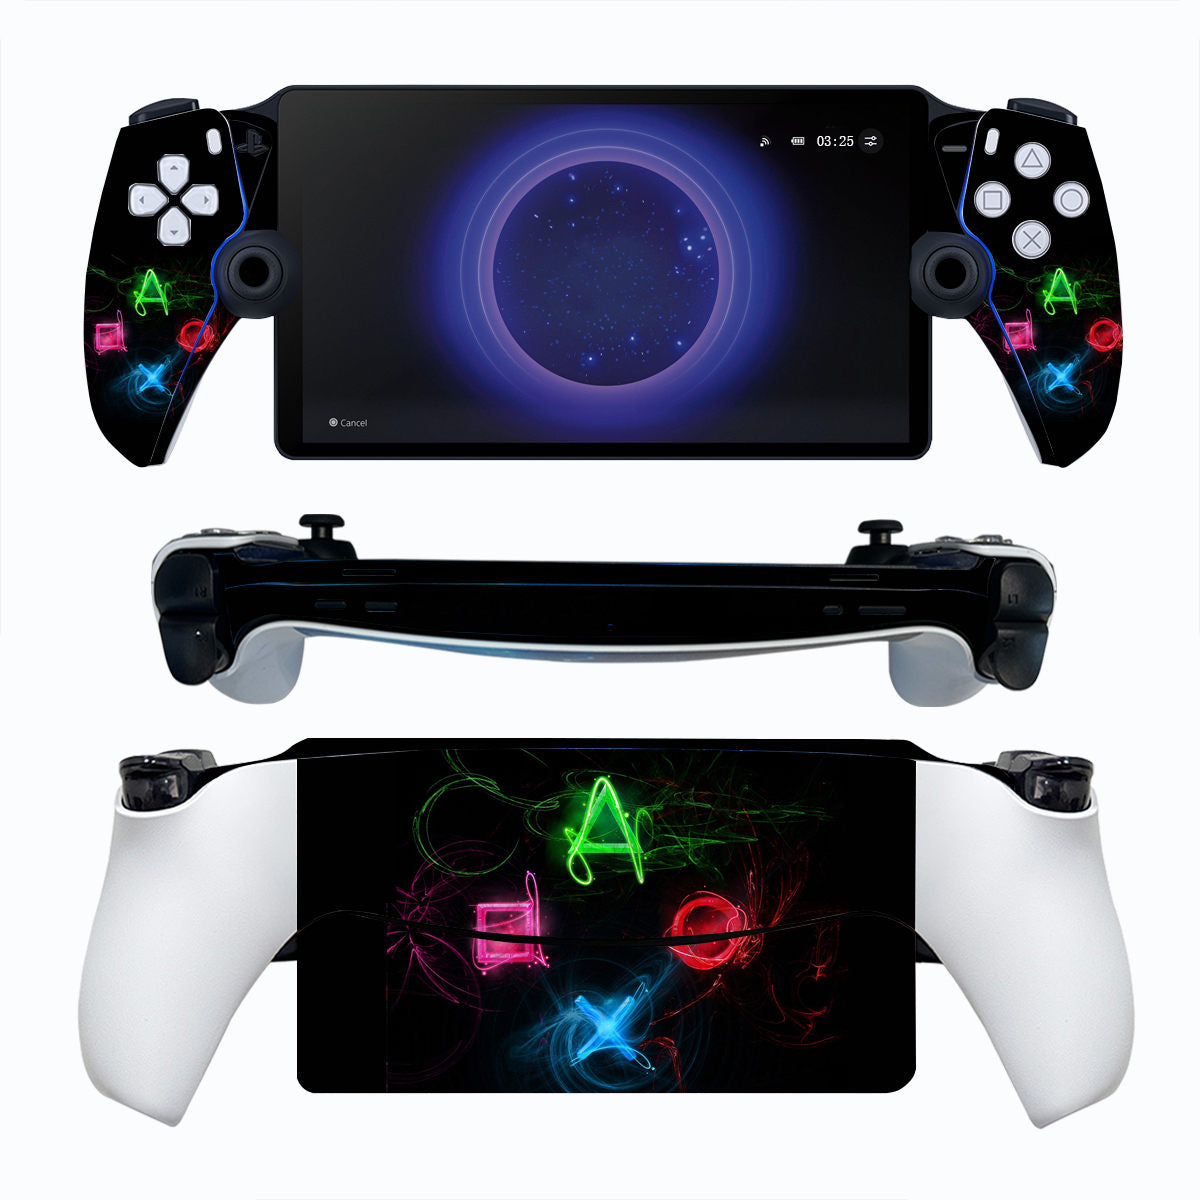 A PlayStation Portal Protector Skin adorned with iconic PlayStation symbols. The skin features the classic triangle, circle, square, and cross buttons in a stylish arrangement, creating a sleek and recognizable design for enhancing your PlayStation console